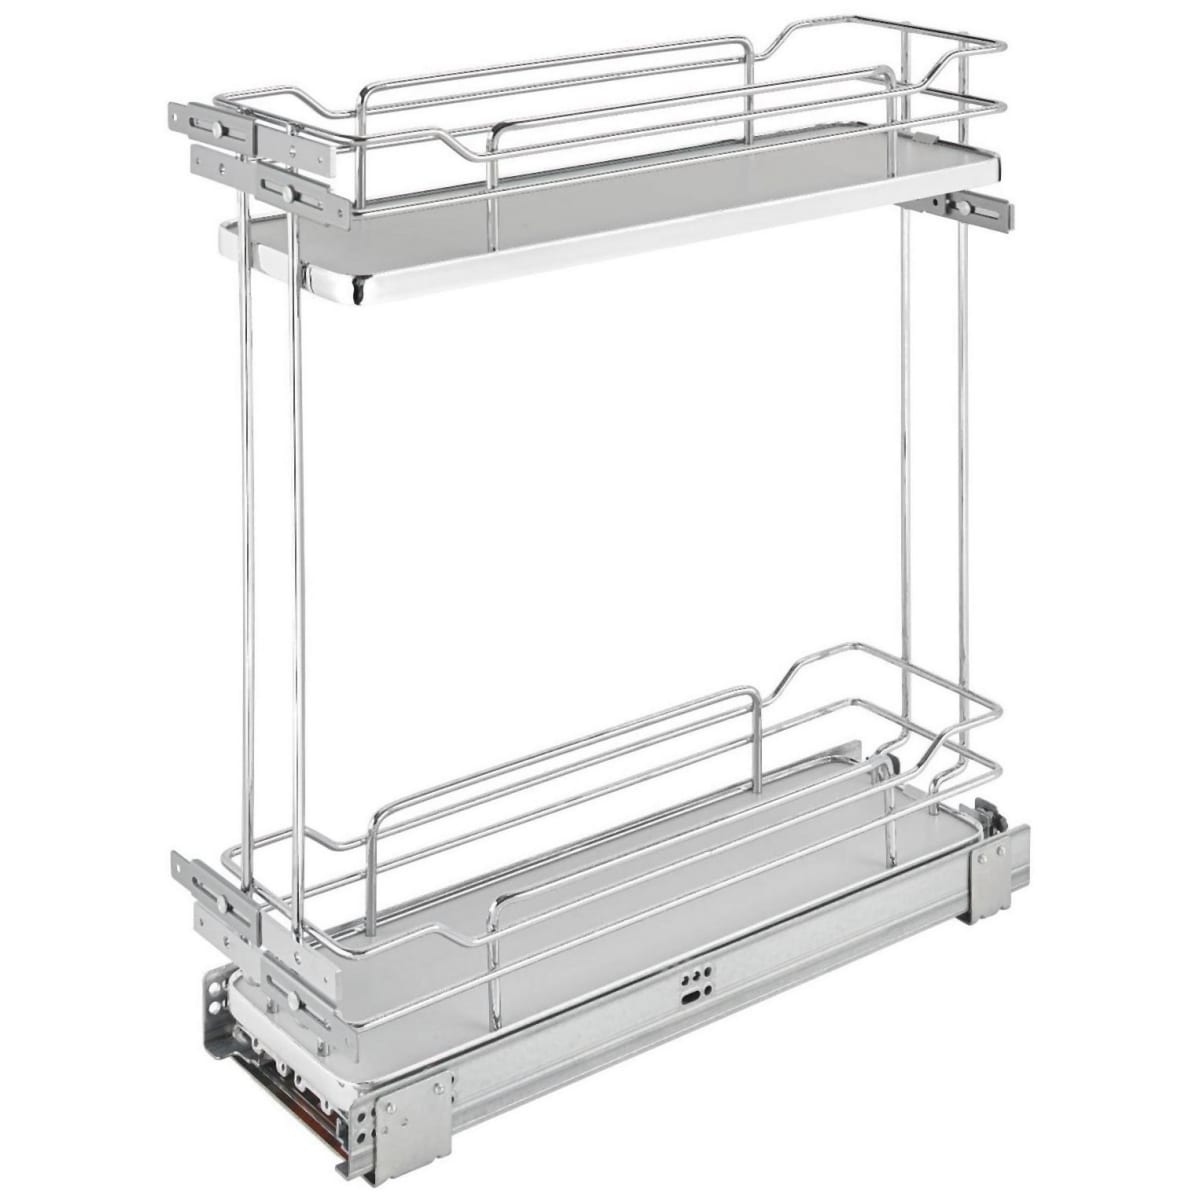 Rev-A-Shelf Two-Tier Utensil Pull Out Organizers with Soft Close